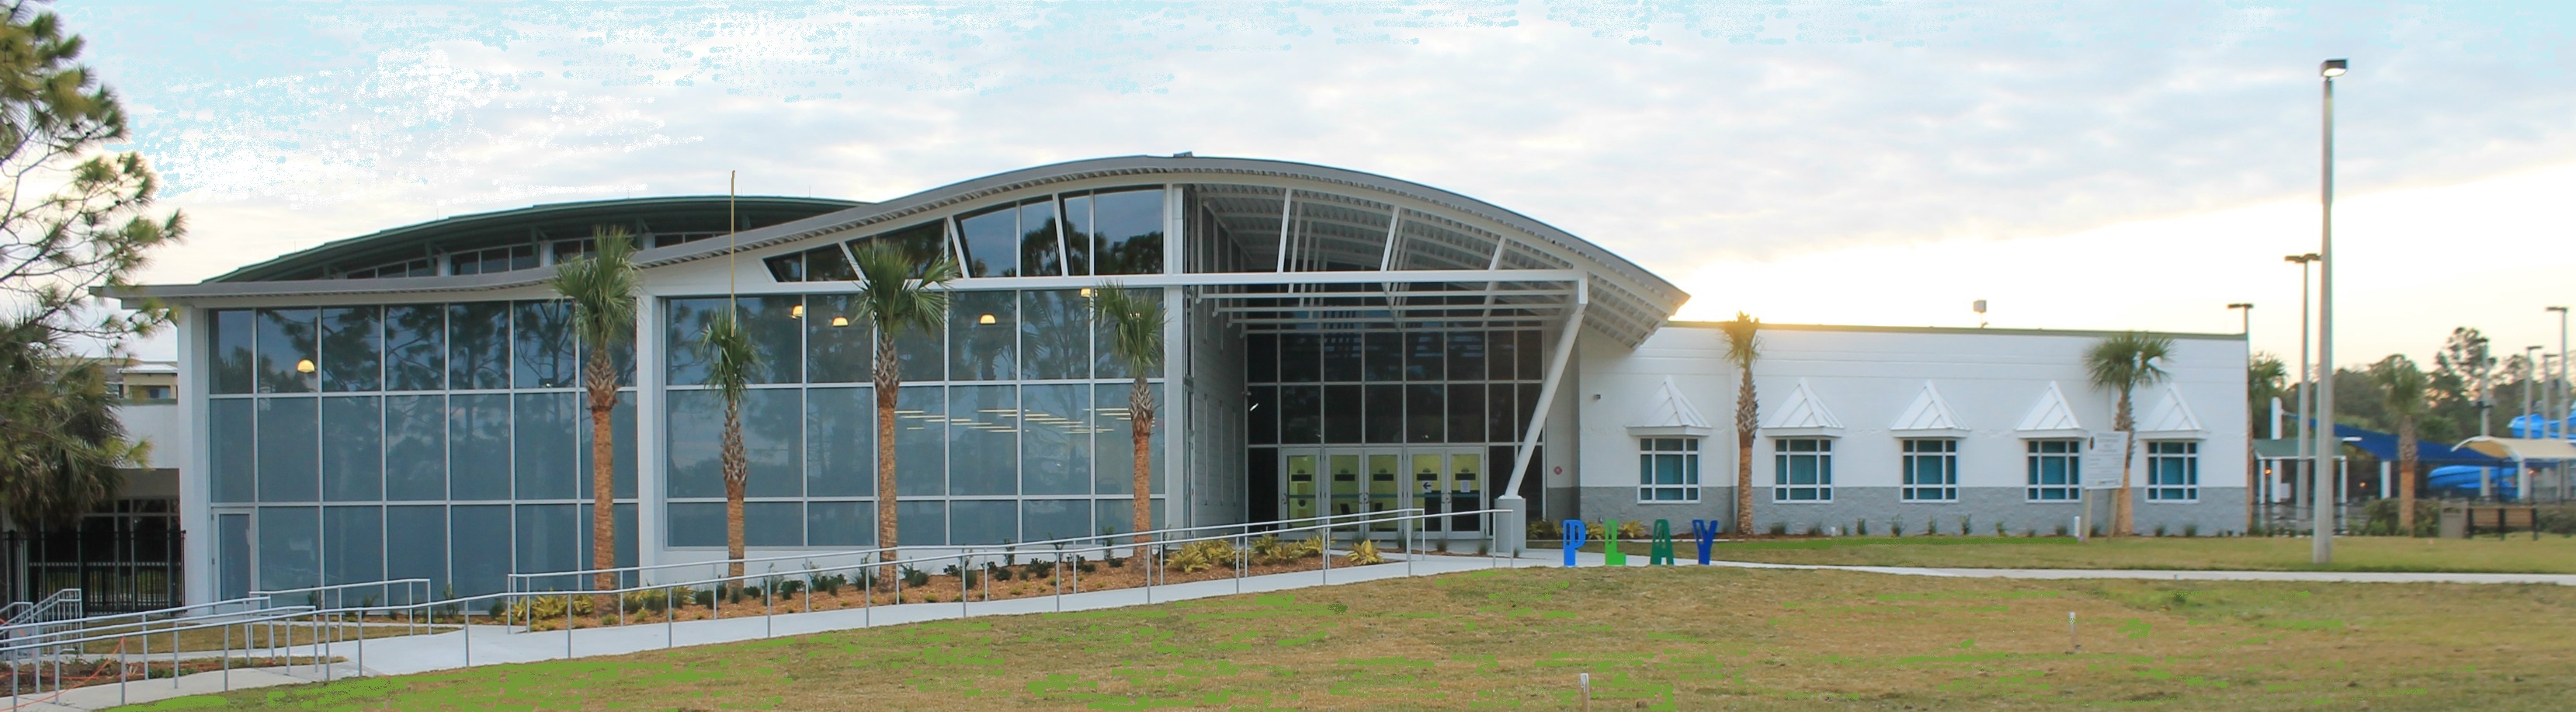 Front view of the Recreation and Aquatic Center. Floor to ceiling windows and a curved roof/awning are prominent.